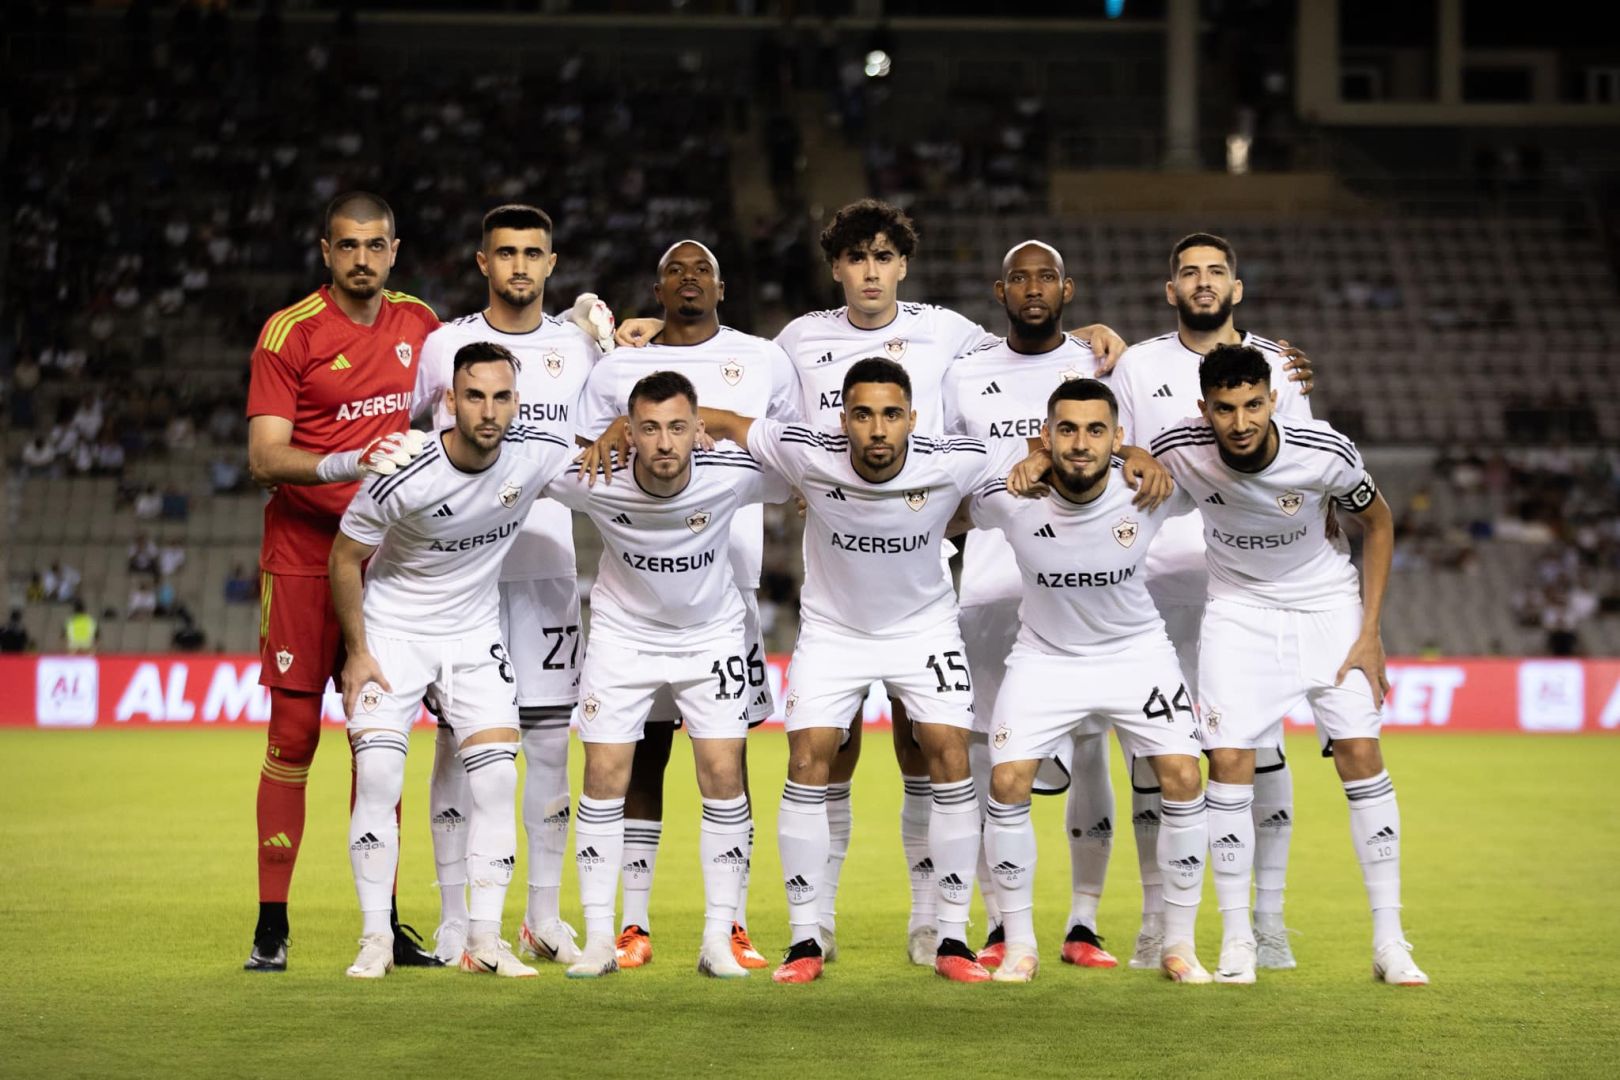 Qarabagh FC qualified for UEFA Europa League Group Stage